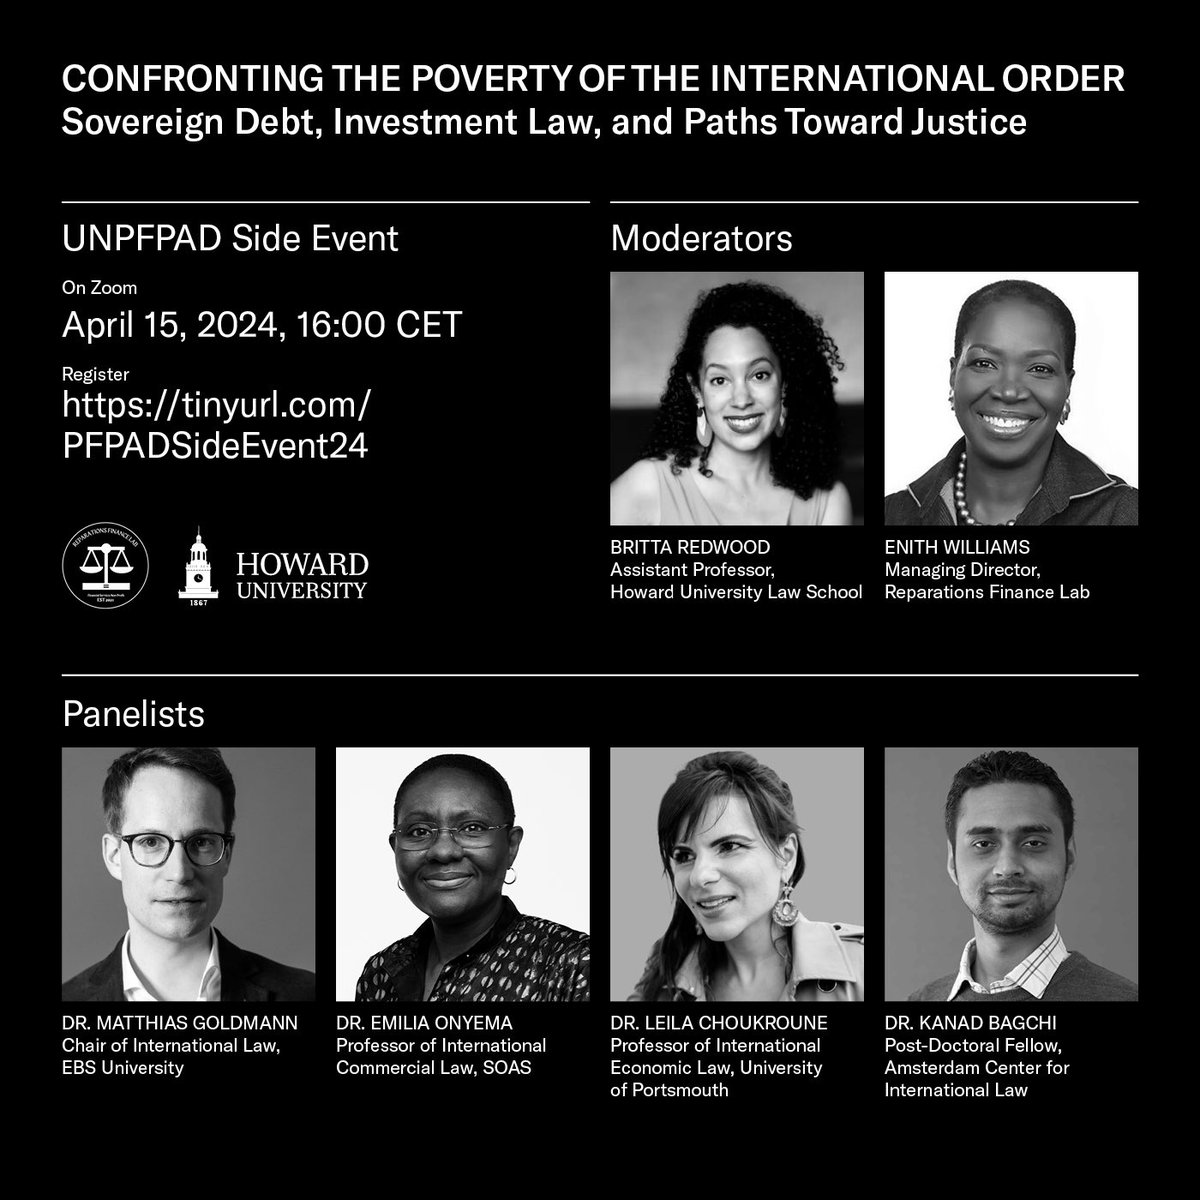 Join us today at 16:00 CET for an important virtual conversation about inequality in the global economy and the dual legacies of slavery and colonialism. Register here: tinyurl.com/PFPADSideEvent…